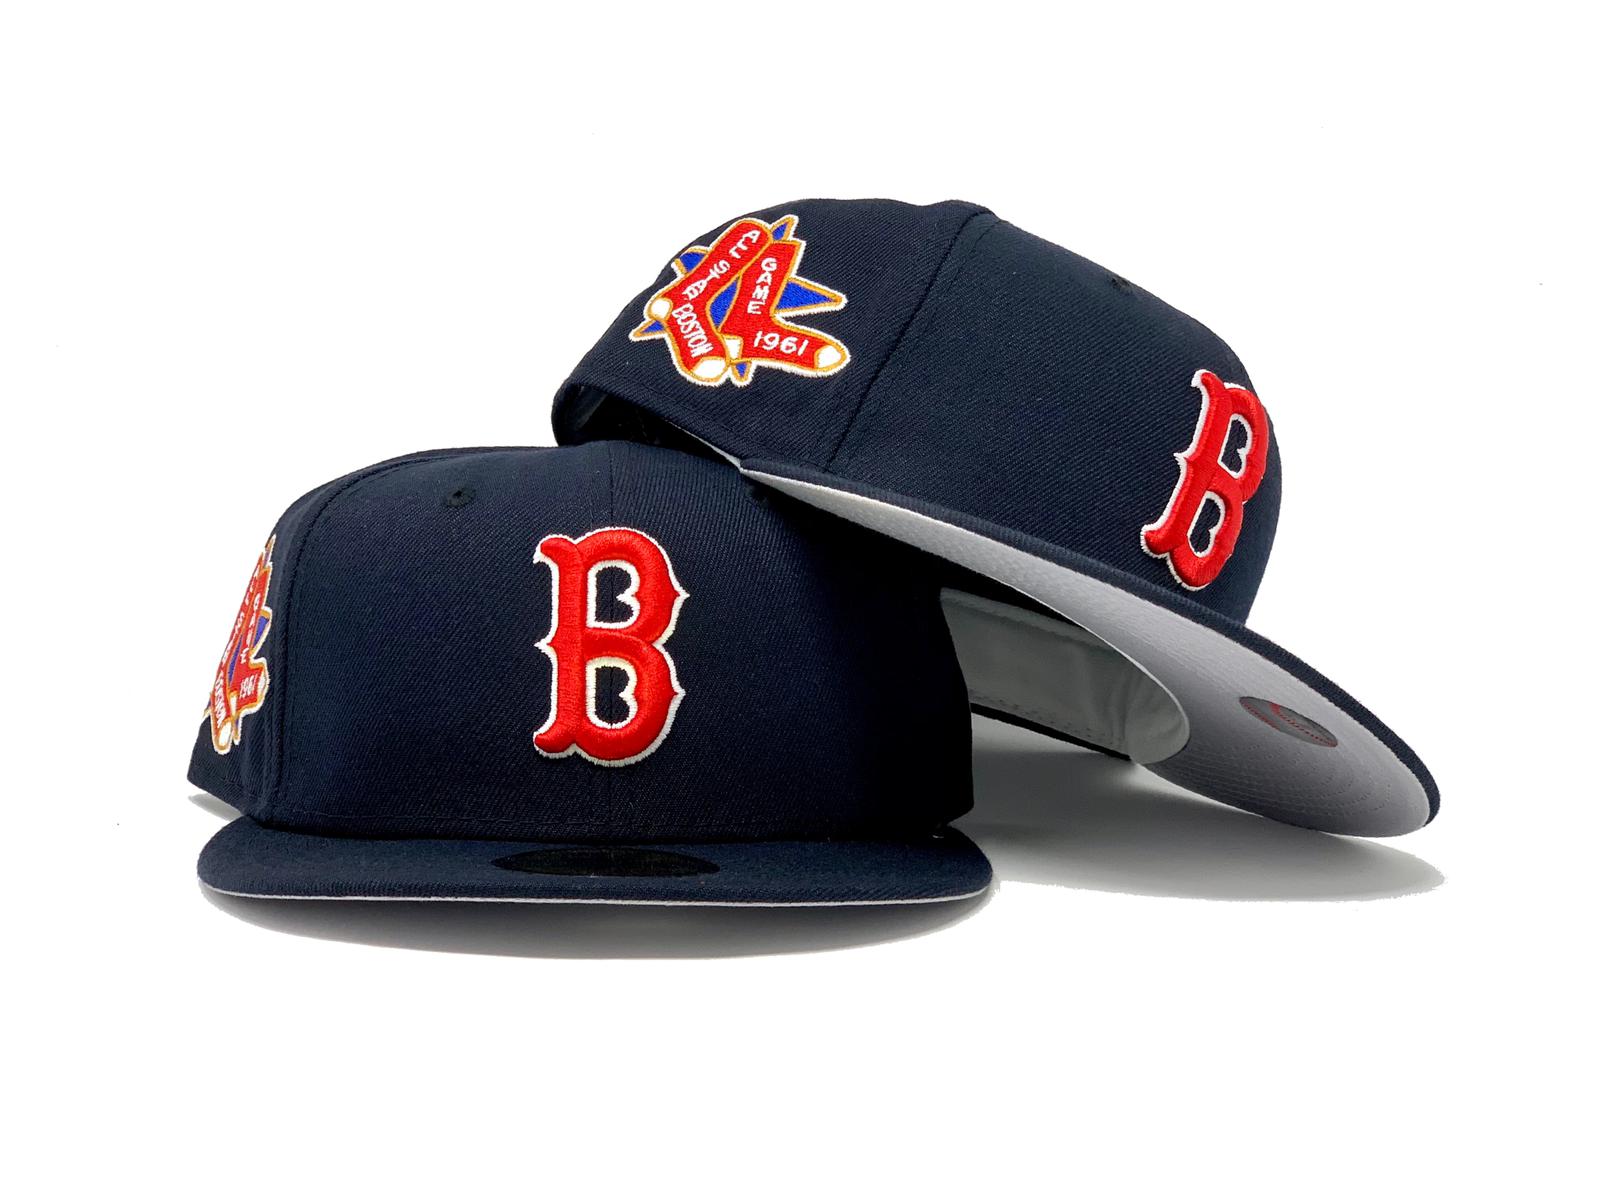 NEW ERA 59FIFTY MLB BOSTON RED SOX ALL STAR GAME 1961 TWO TONE / VEGAS GOLD  UV FITTED CAP